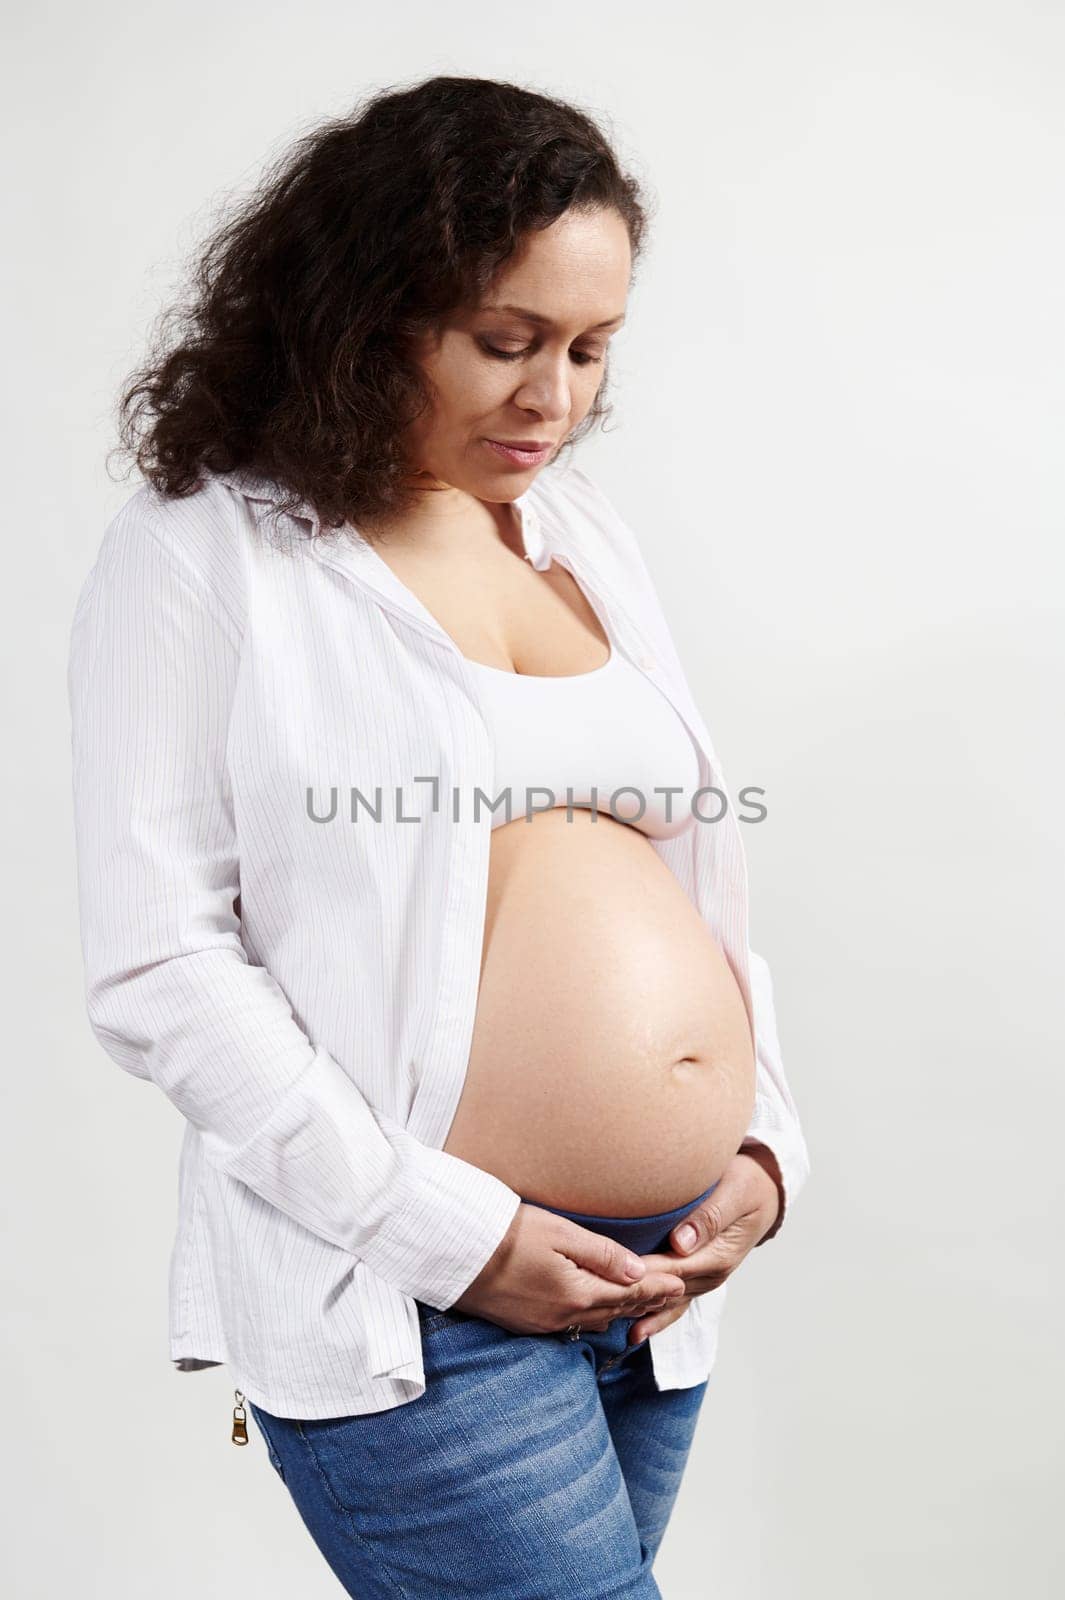 Confident serene delightful African American pregnant woman 30-39 years old, expecting a baby, touching belly over isolated white background. Pregnancy fashion. 6 month. 24 weeks. Maternity concept